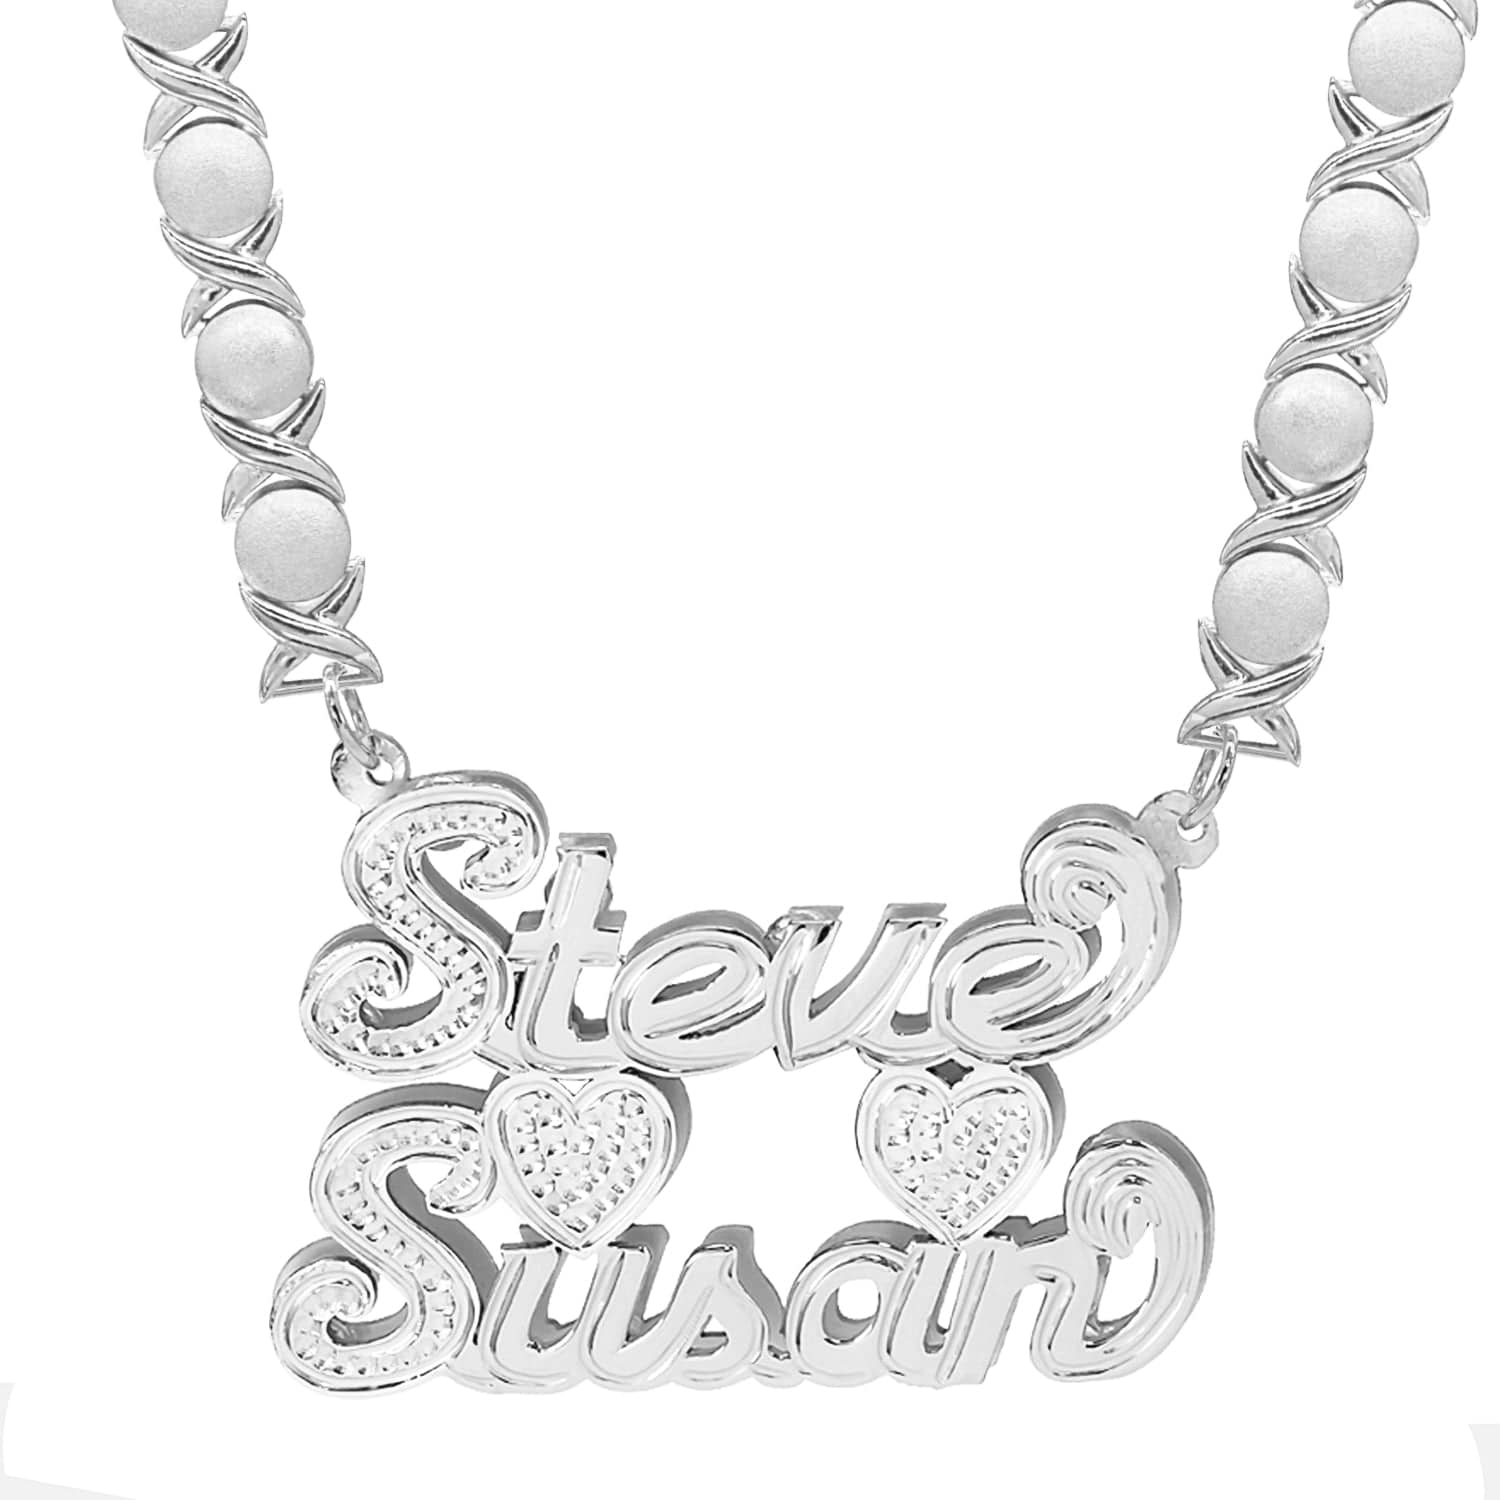 Two-Tone. Sterling Silver / Rhodium Xoxo Chain Double Plated Couples Name Necklace with Rhodium Xoxo Chain